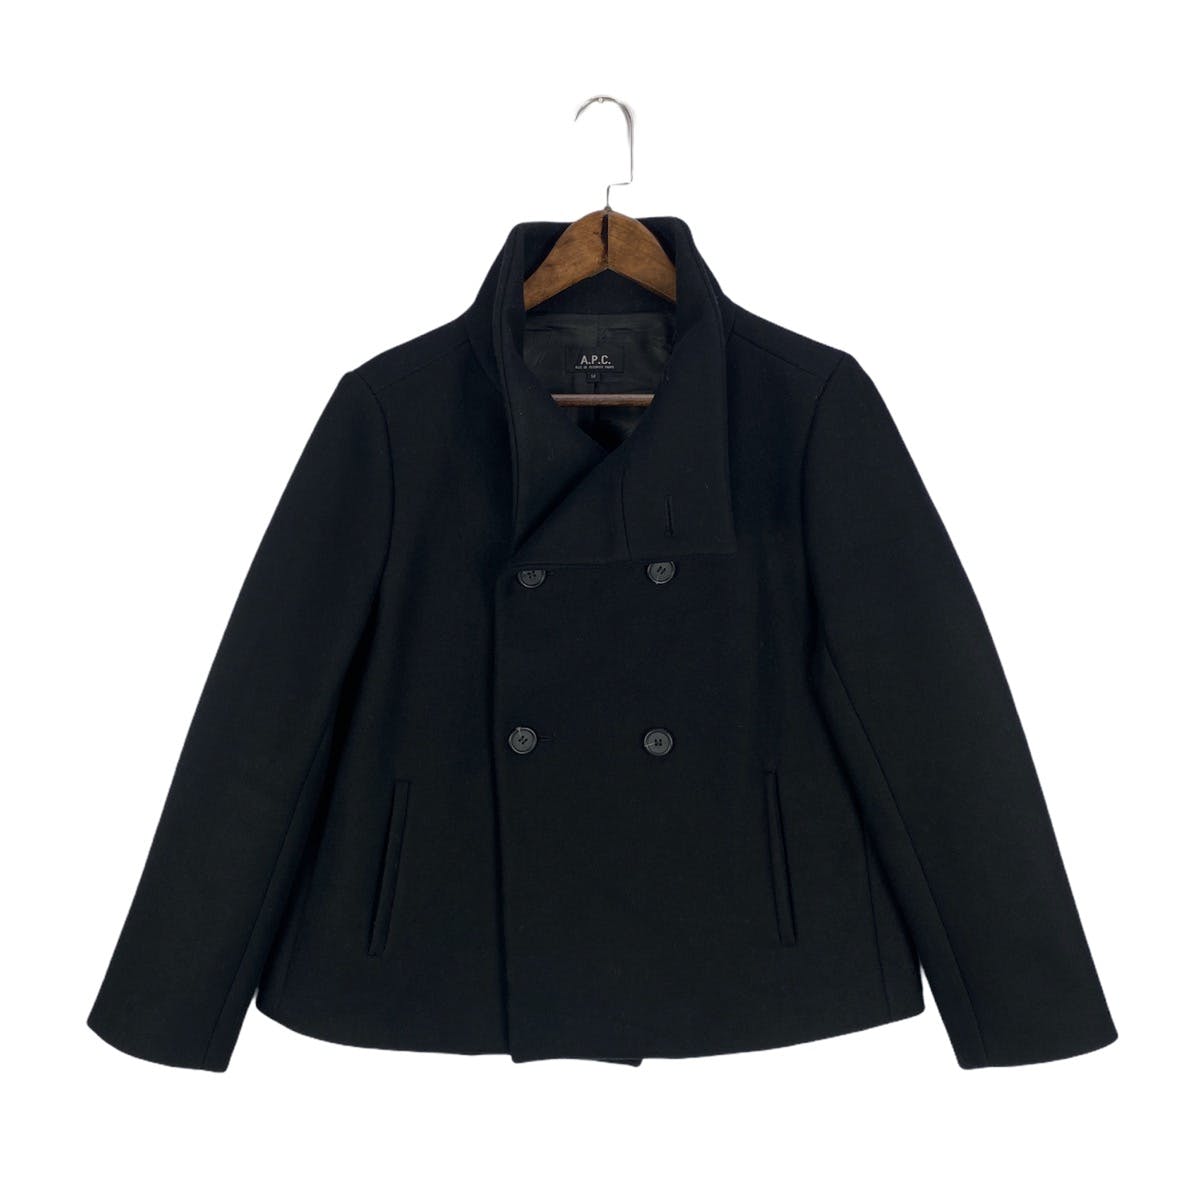 A.P.C Peacoat Wool Cropped Jacket Made In Poland - 2